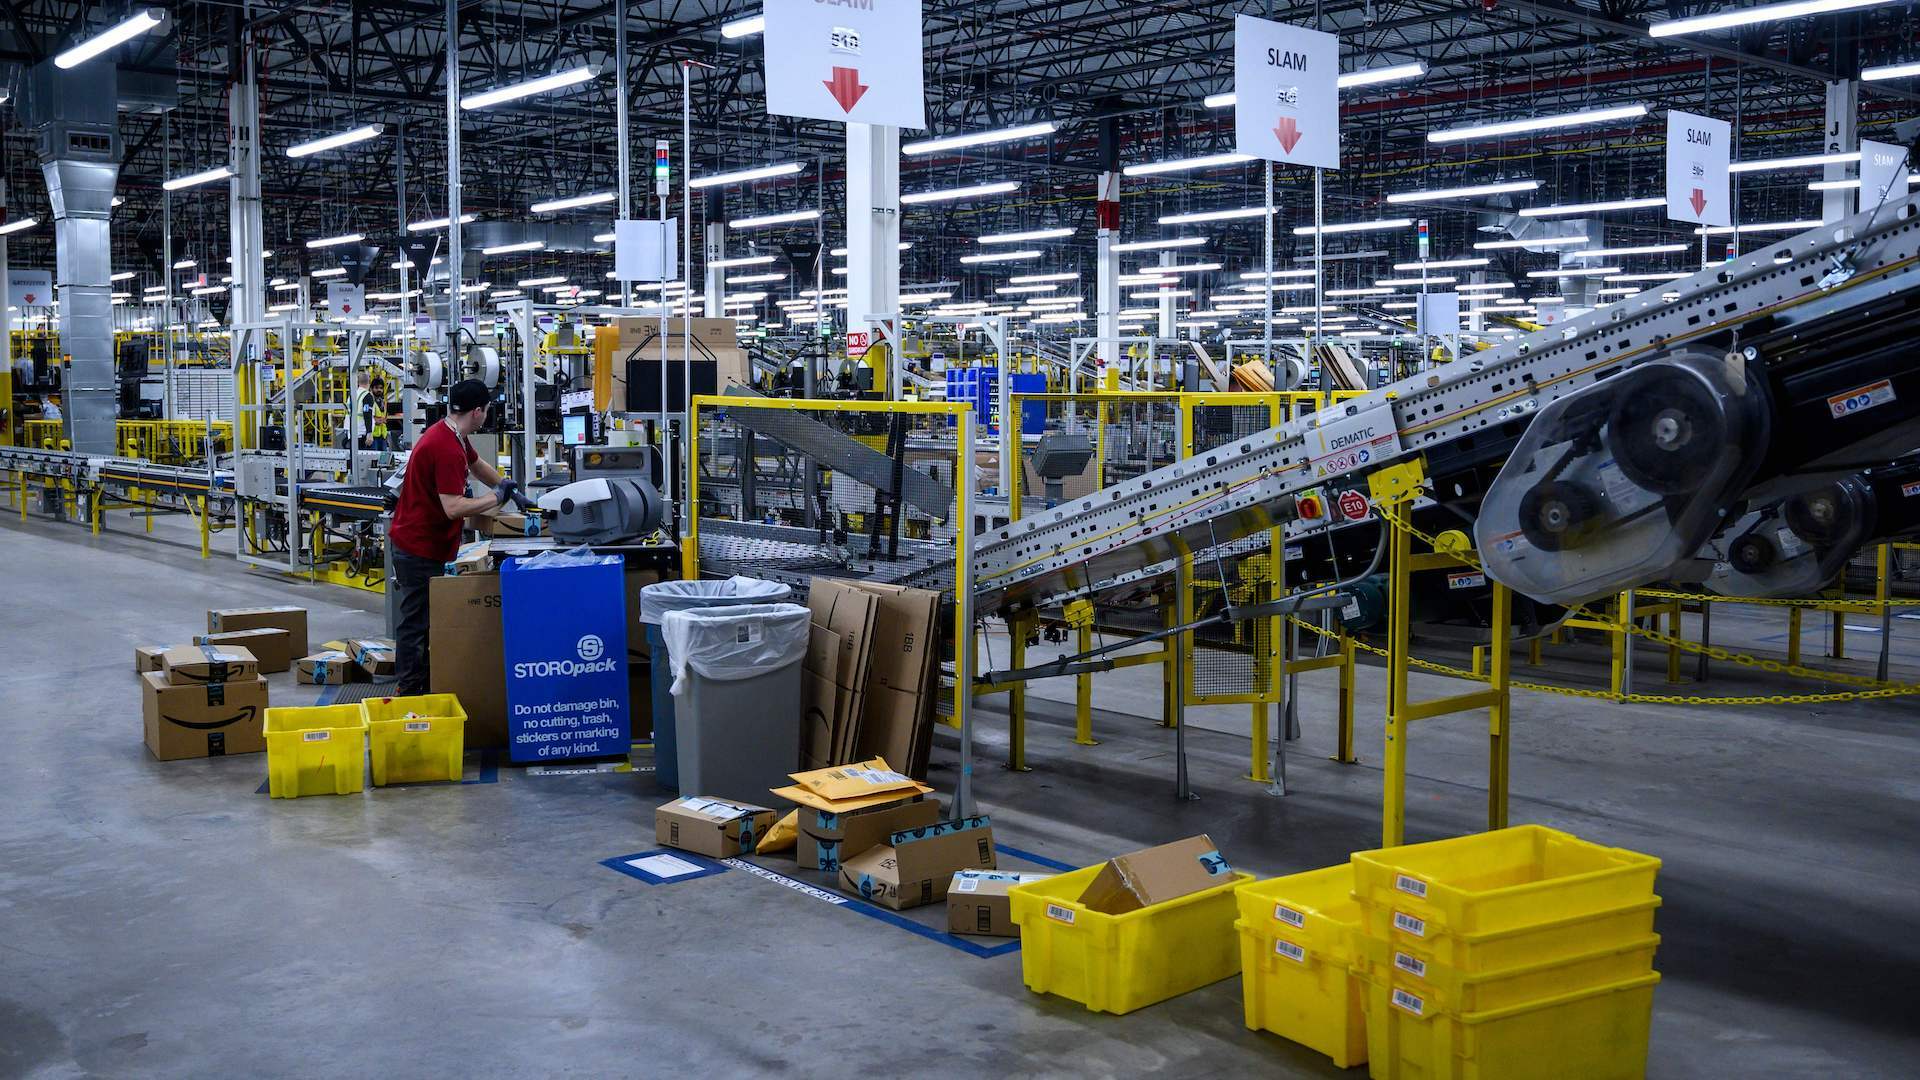 A man works at a conveyor belt at the 855,000-square-foot Amazon fulfillment center in Staten Island, one of the five boroughs of New York City, on February 5, 2019